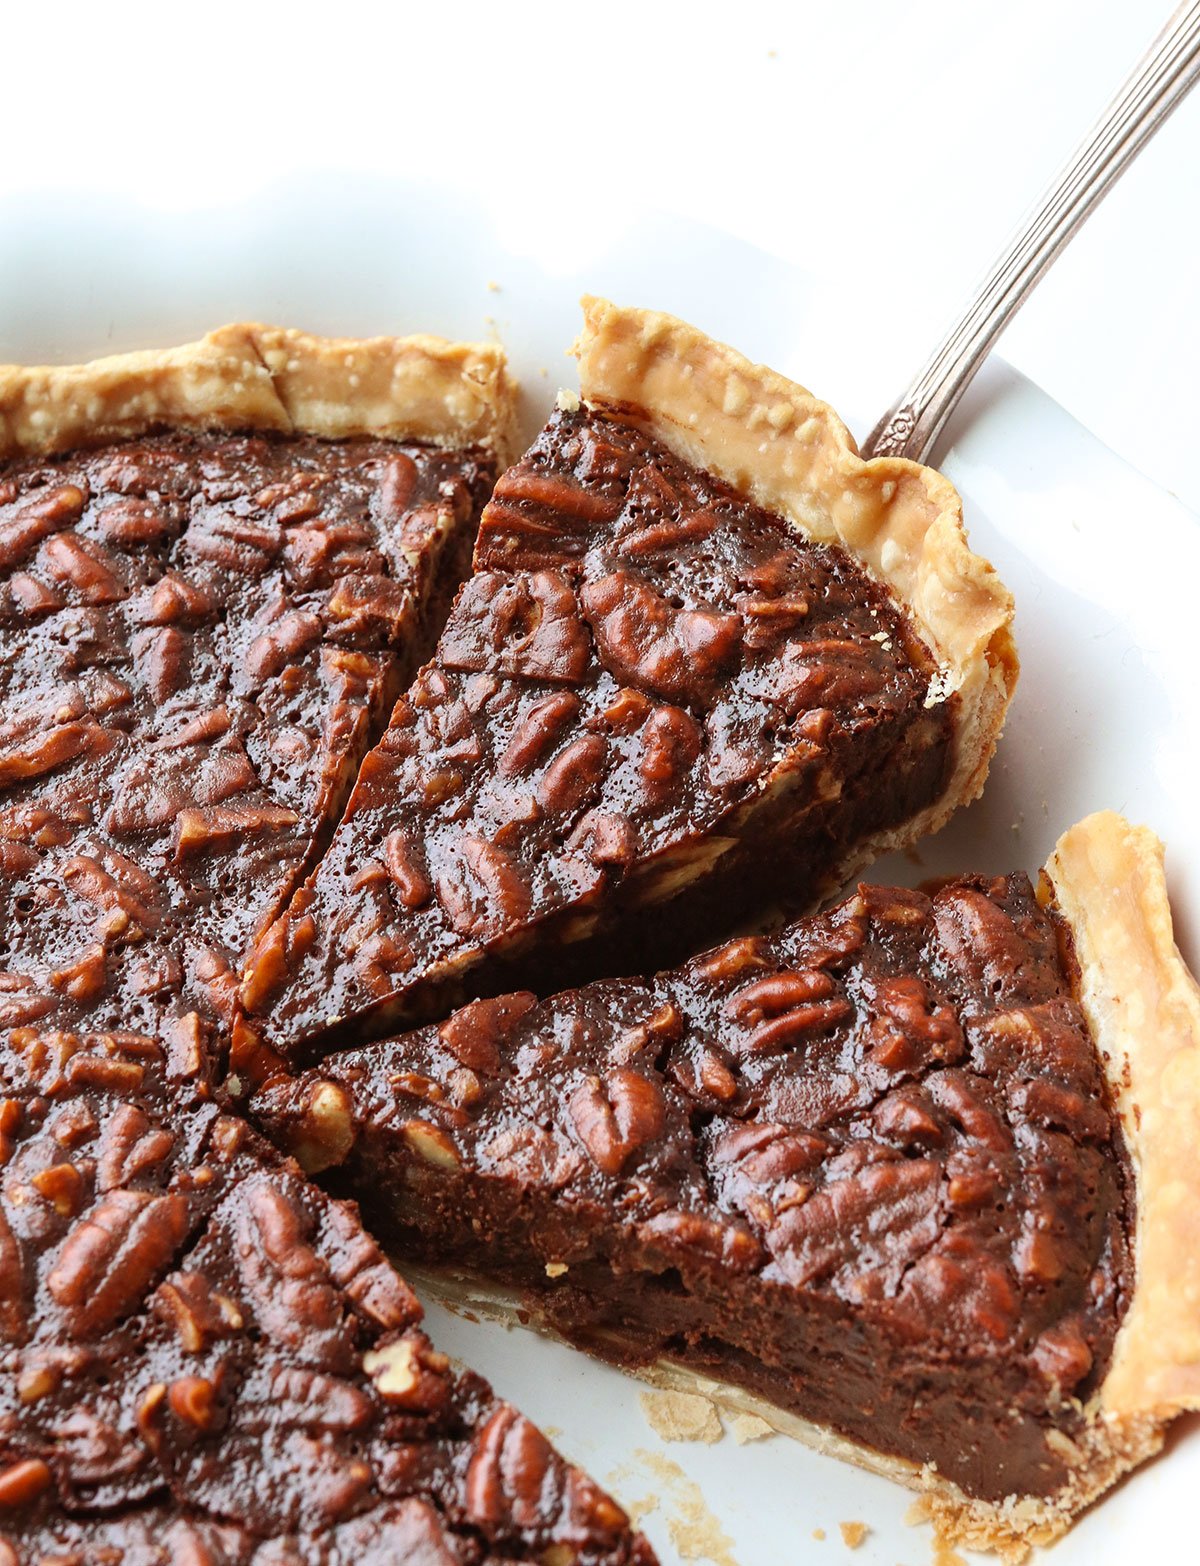 Chocolate pecan pie slice lifted up from a pie pan.